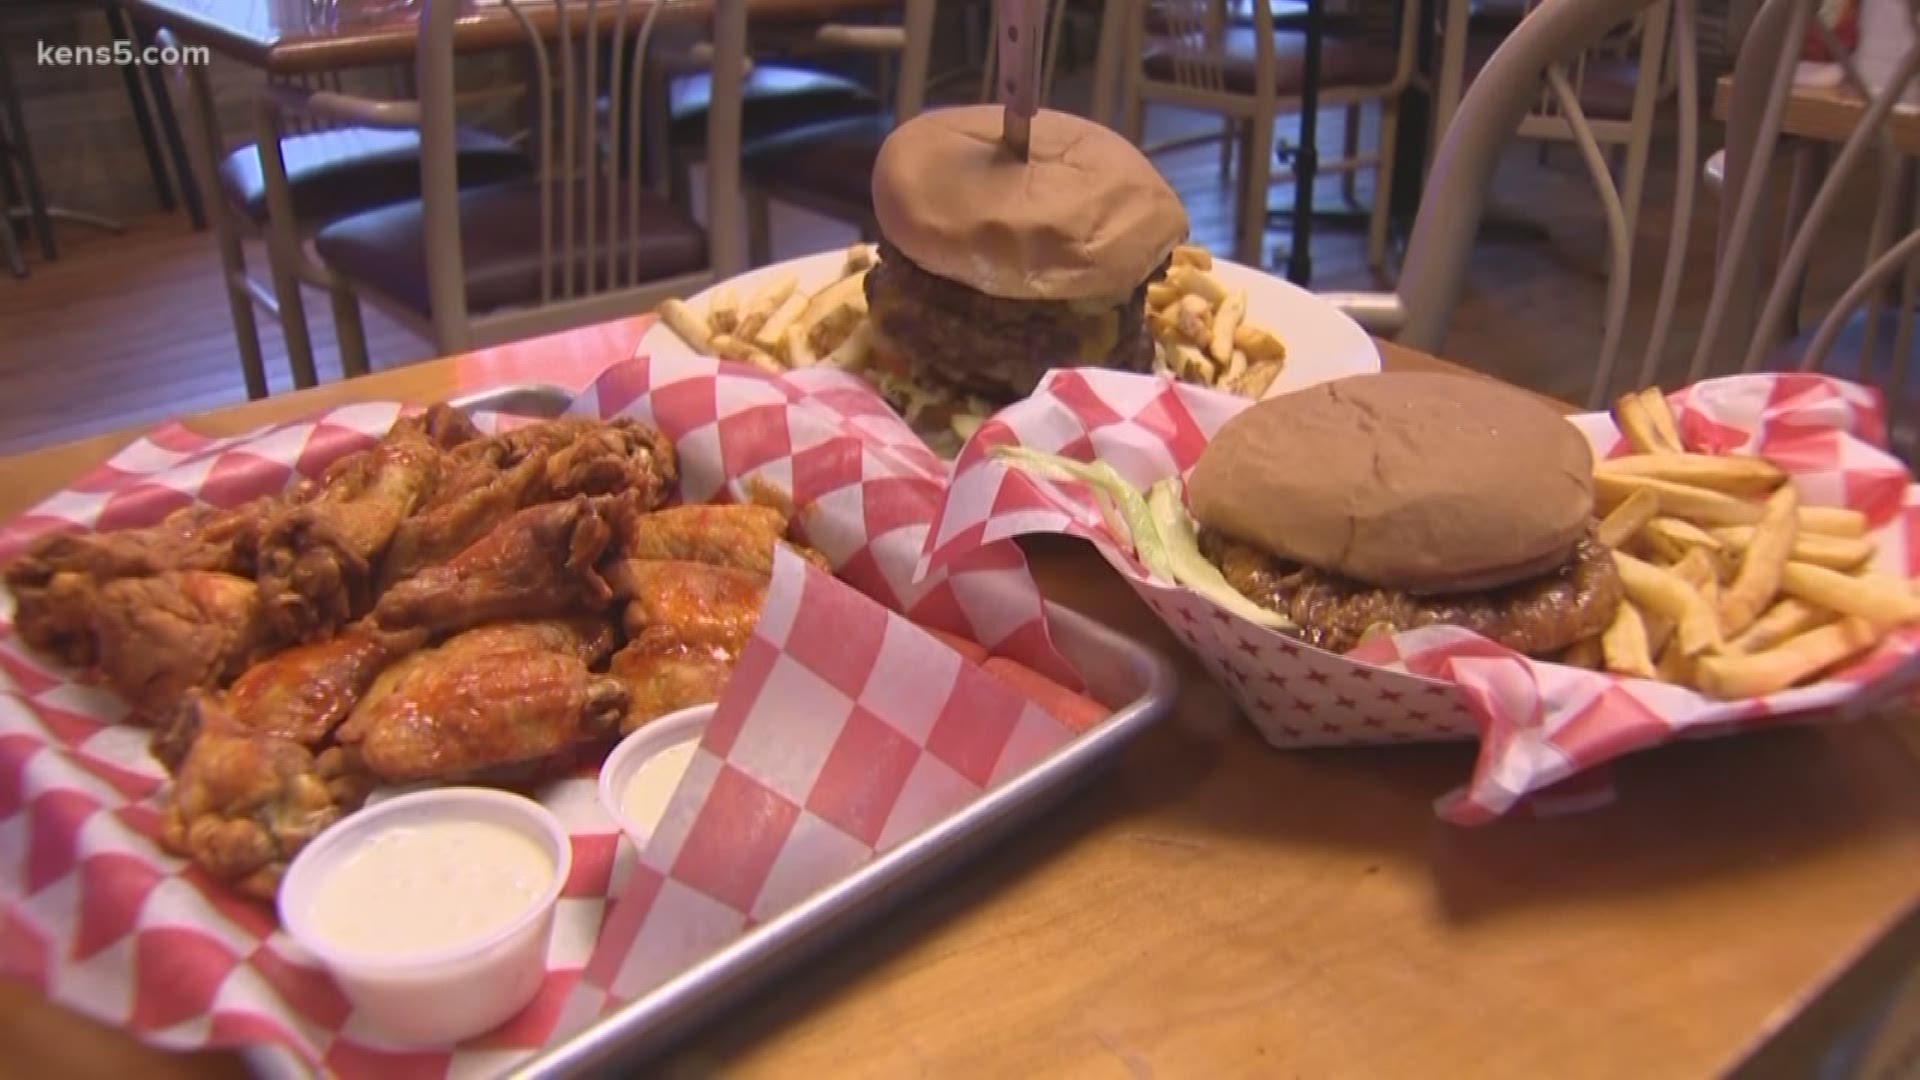 The Neighborhood Eats 'Big Food Tour' heads to 4 Way Bar & Grill, on the north side of Medina Lake, where Marvin Hurst came across a challenge burger so big it had to be downsized so customers would eat it. MORE: https://on.kens5.com/2ZQqacK